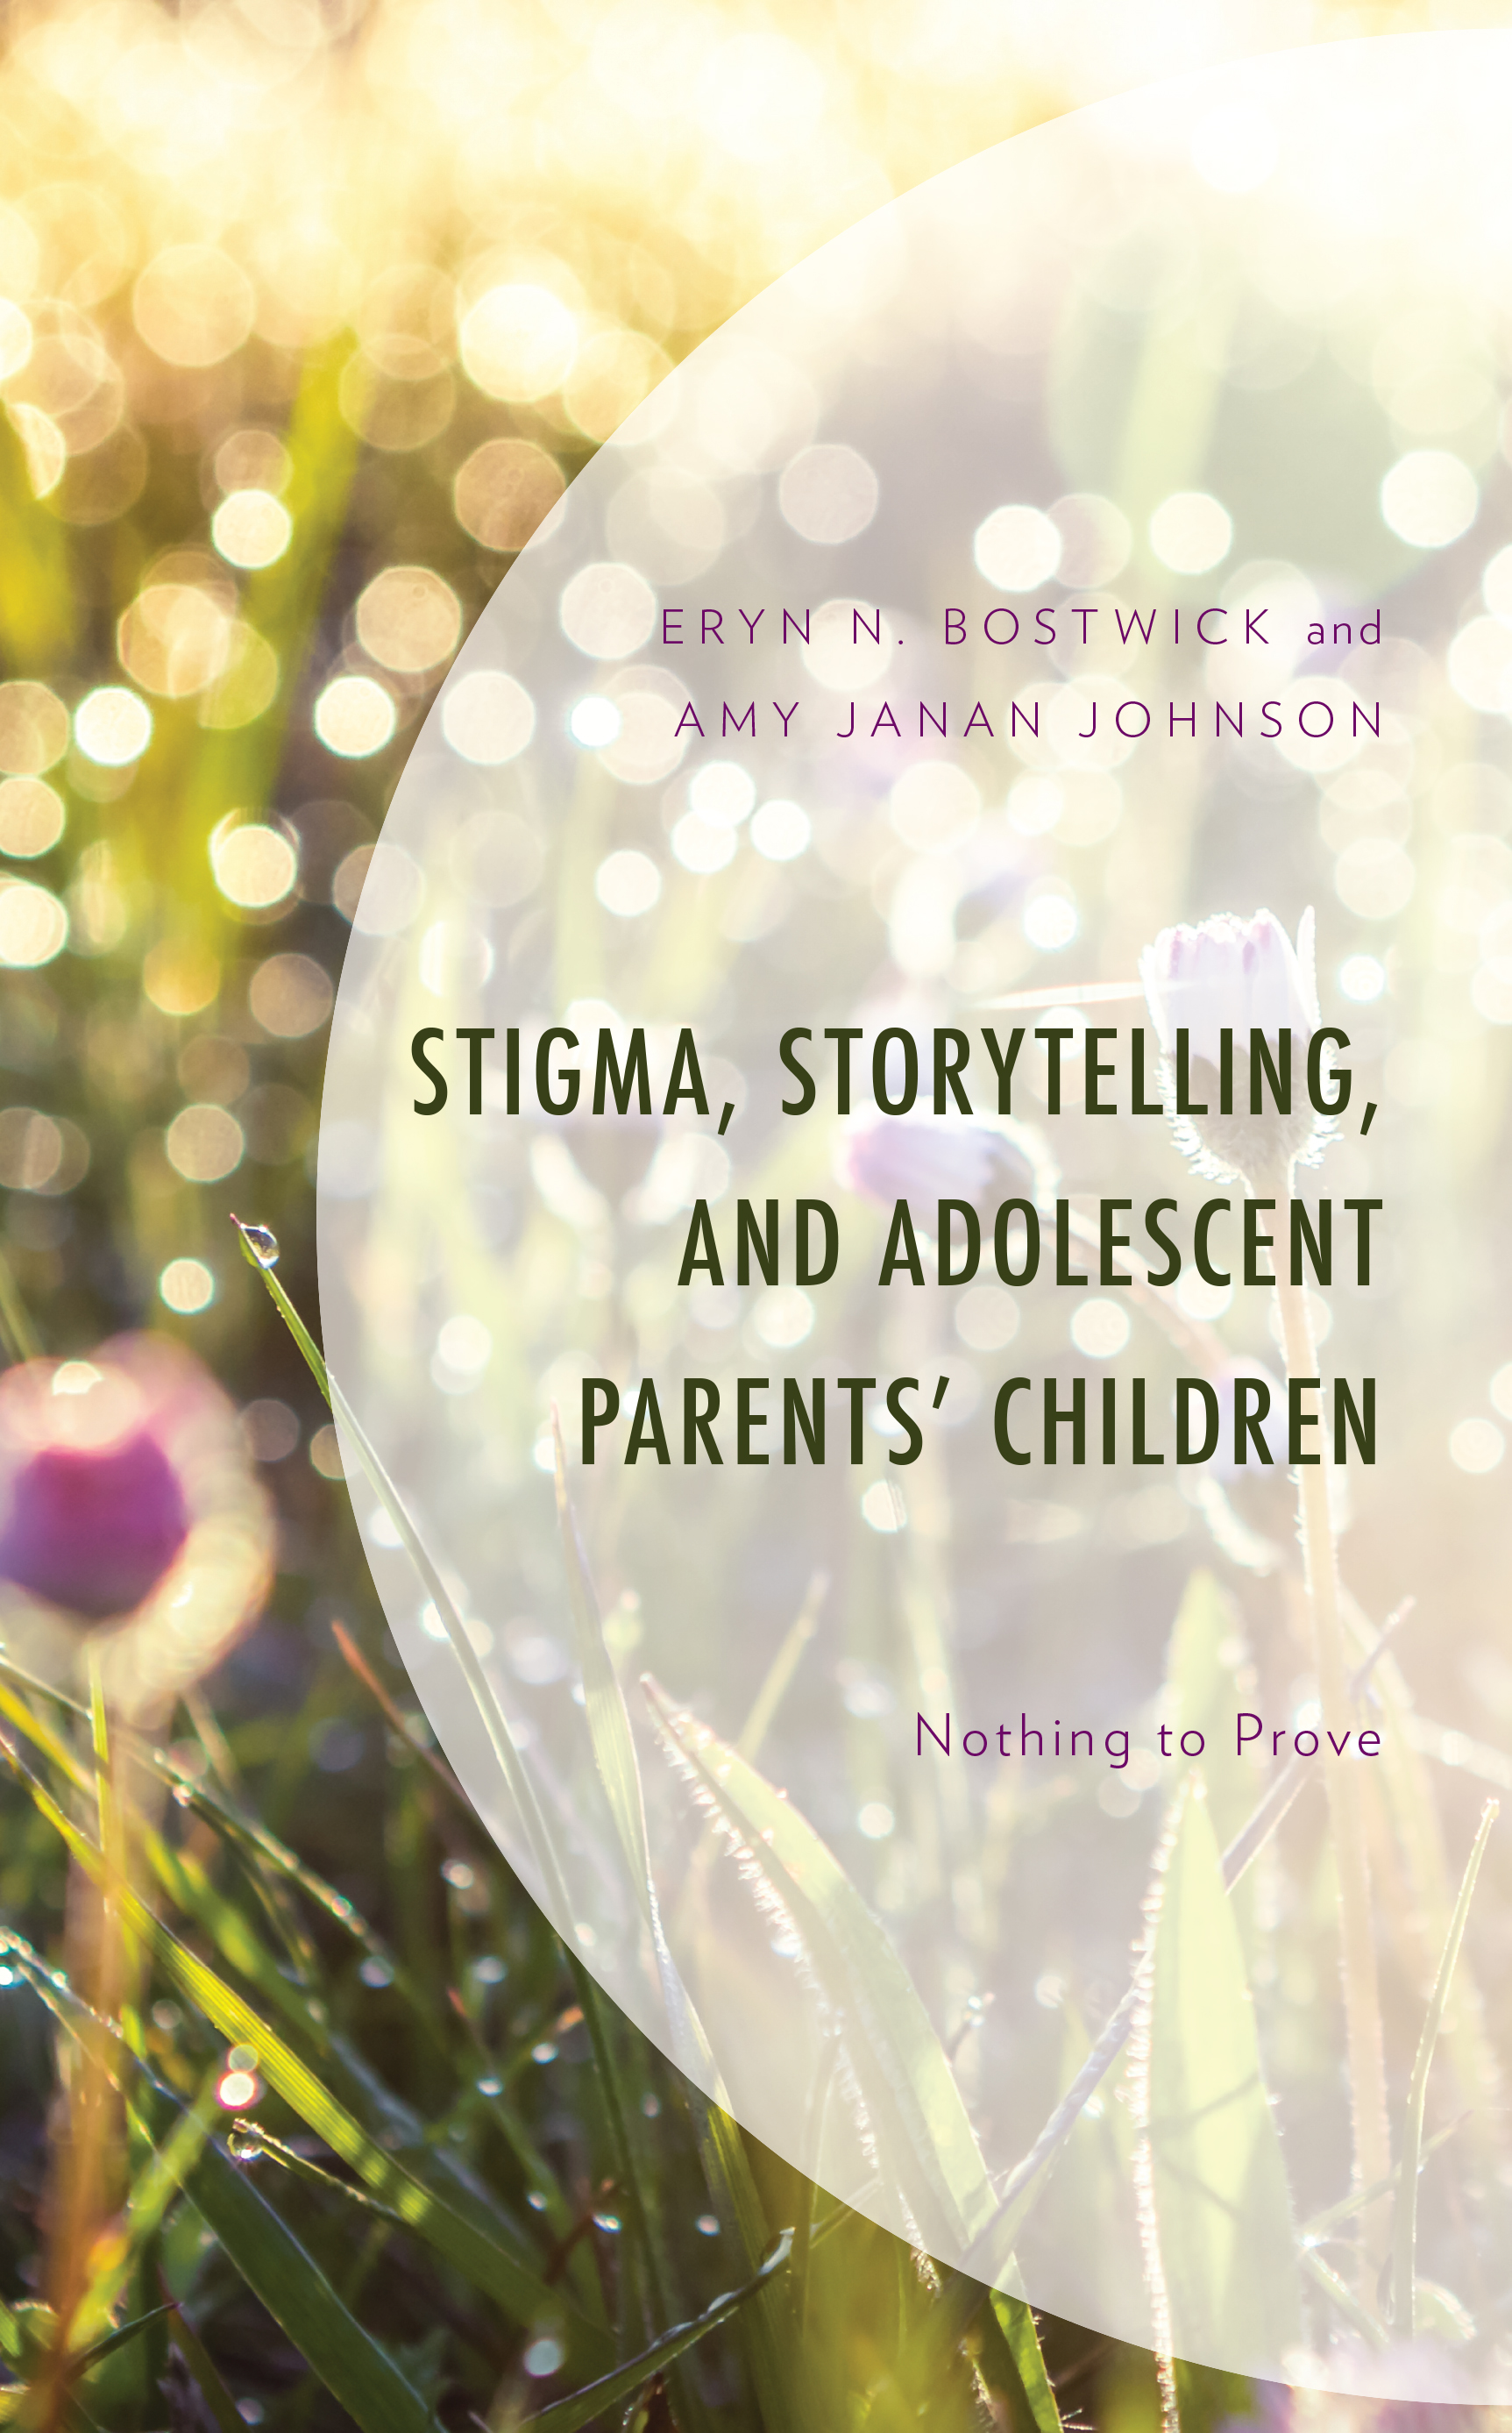 Stigma, Storytelling, and Adolescent Parents' Children: Nothing to Prove